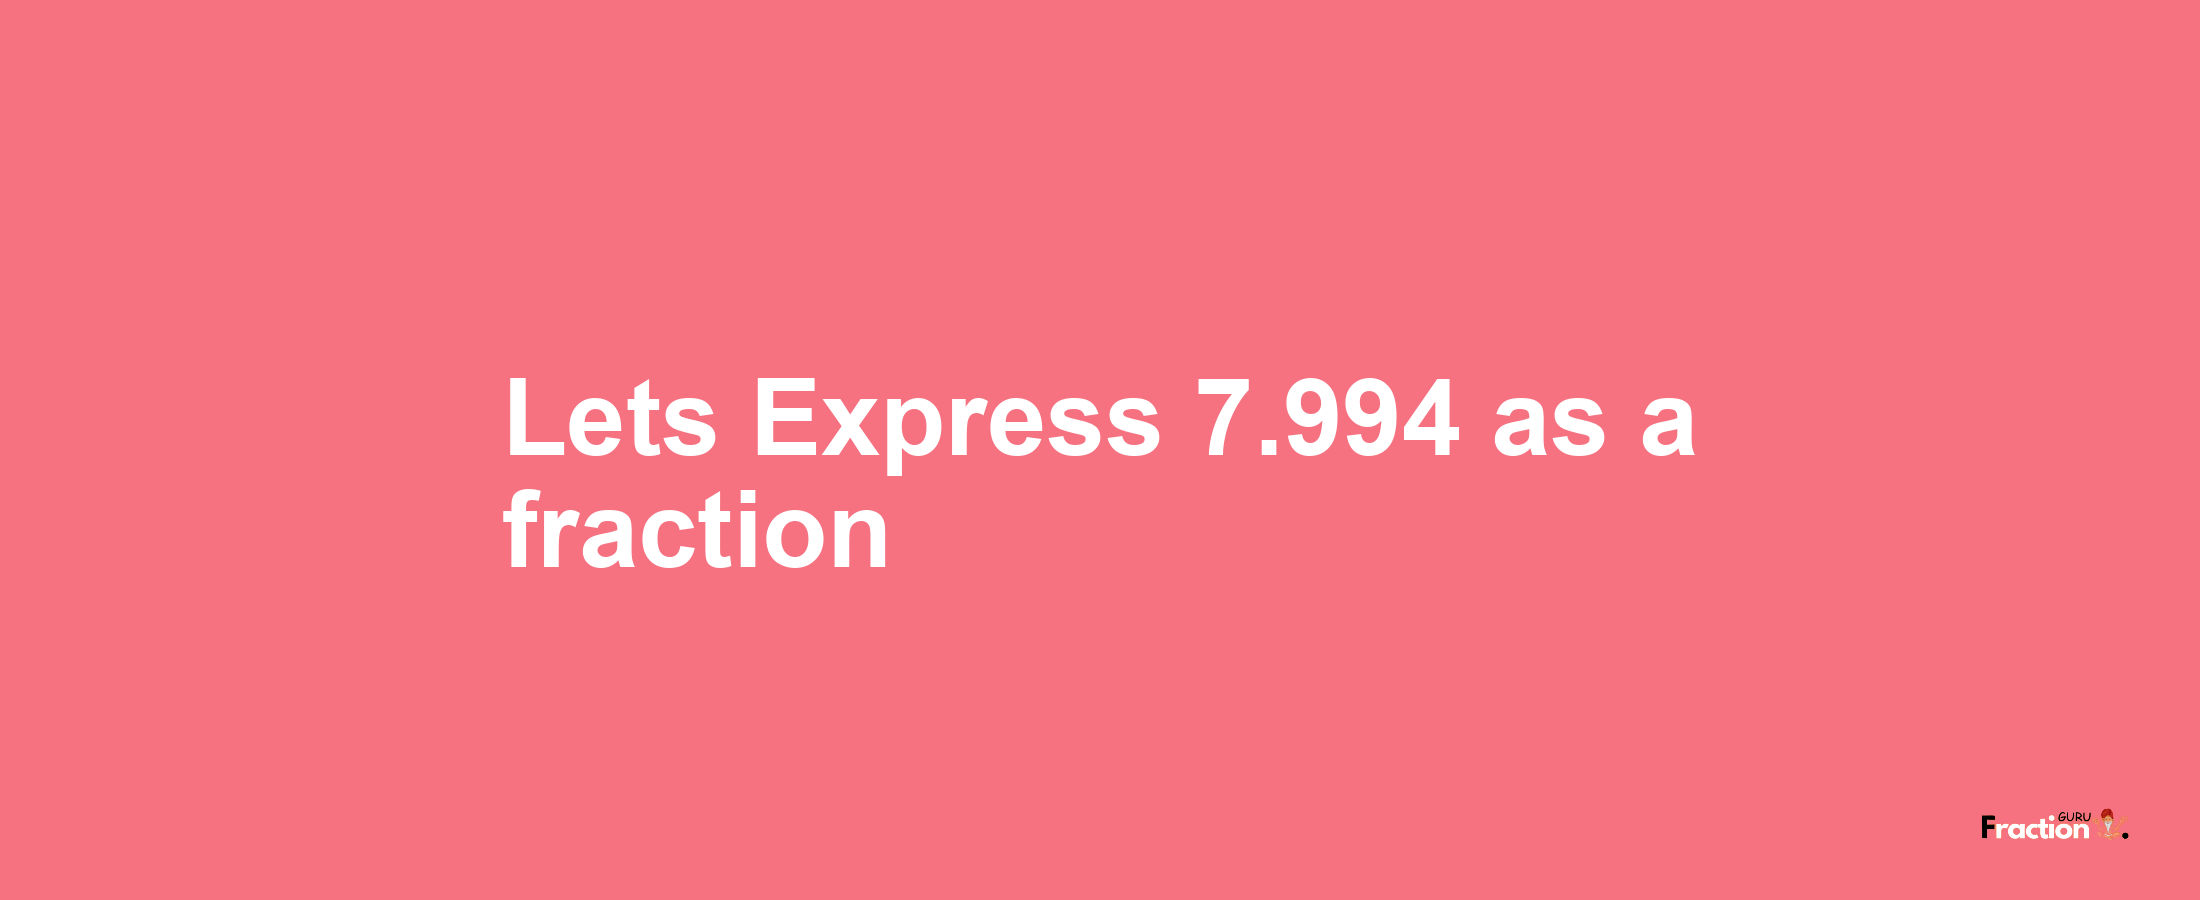 Lets Express 7.994 as afraction